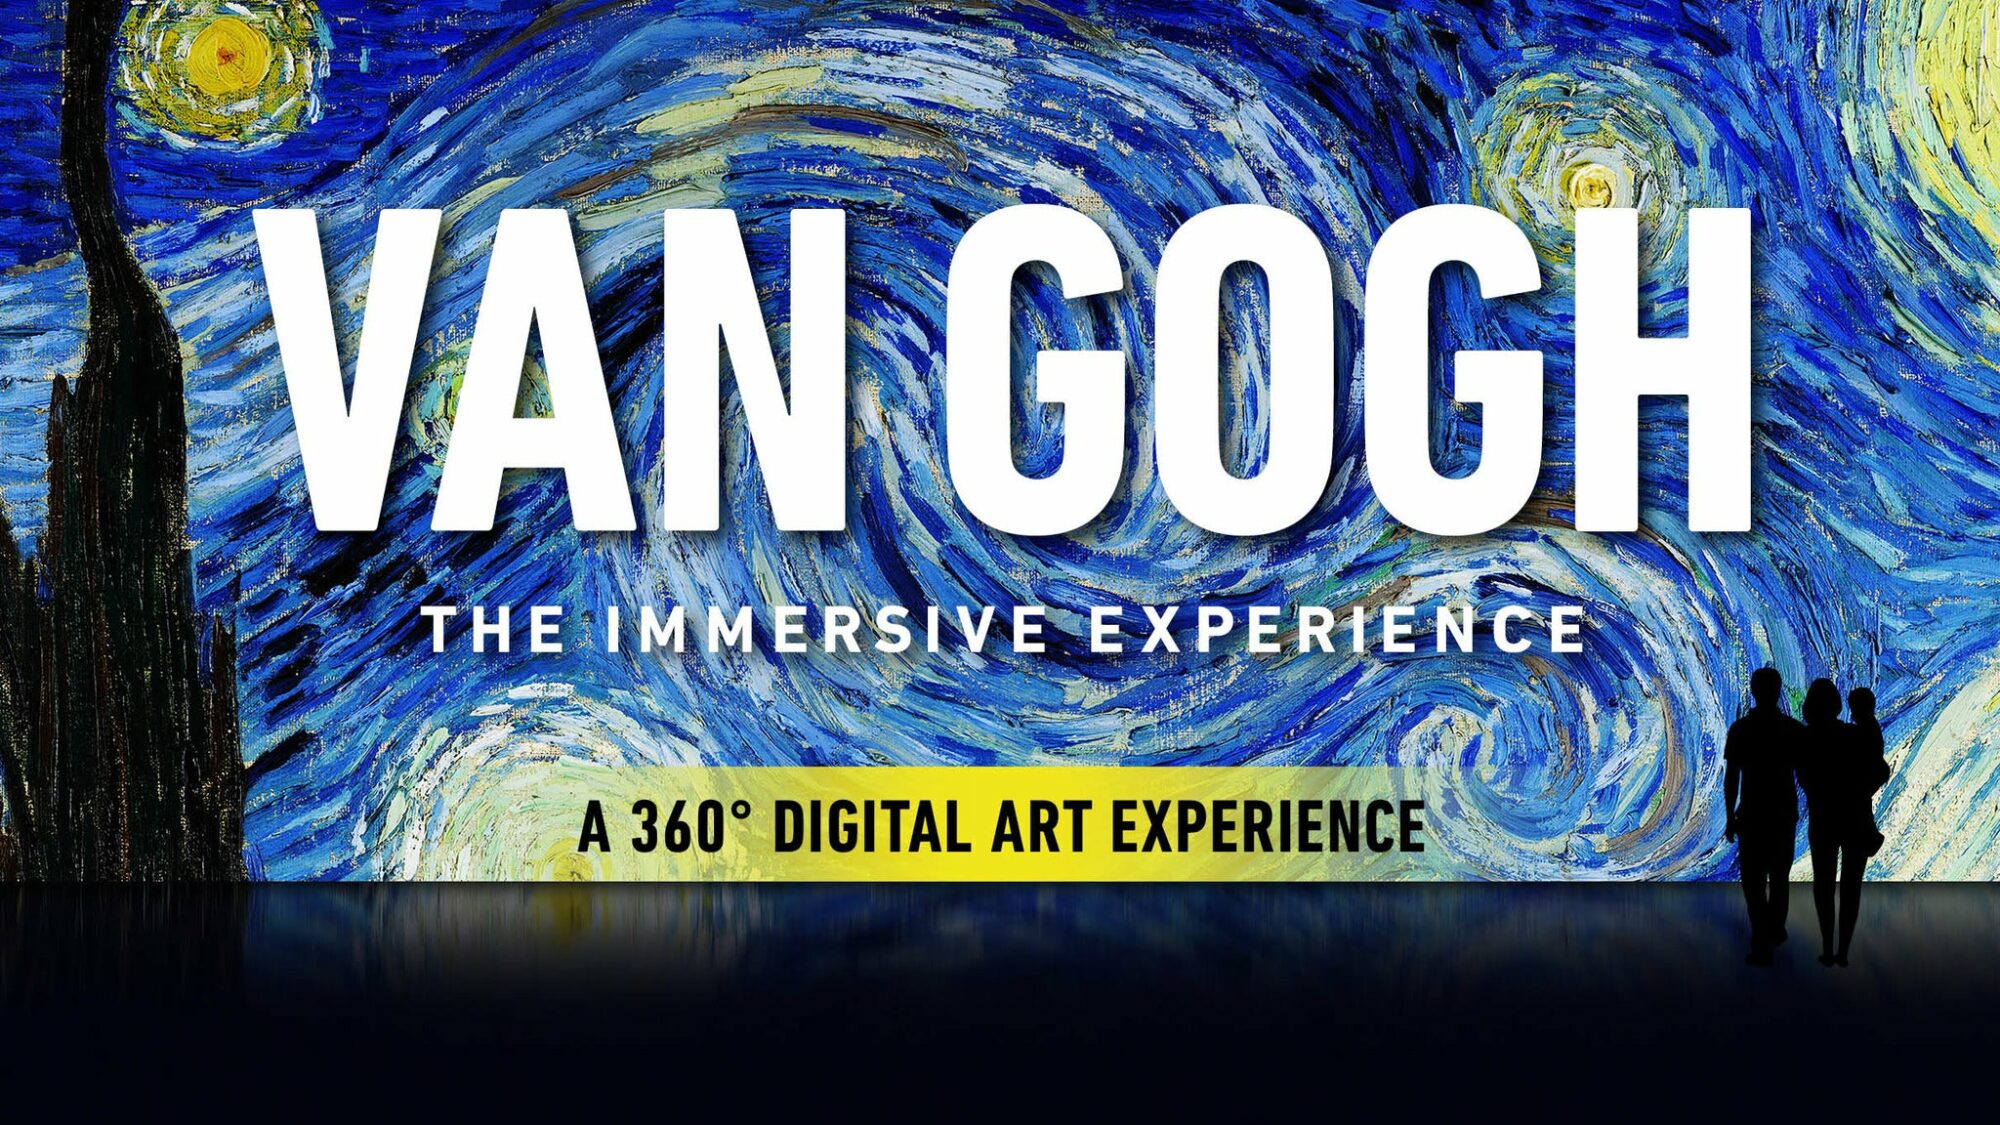 Image name Van Gogh the Immersive Experience York at York St. Marys York the 21 image from the post Van Gogh: the Immersive Experience (York) at York St. Mary's, York in Yorkshire.com.